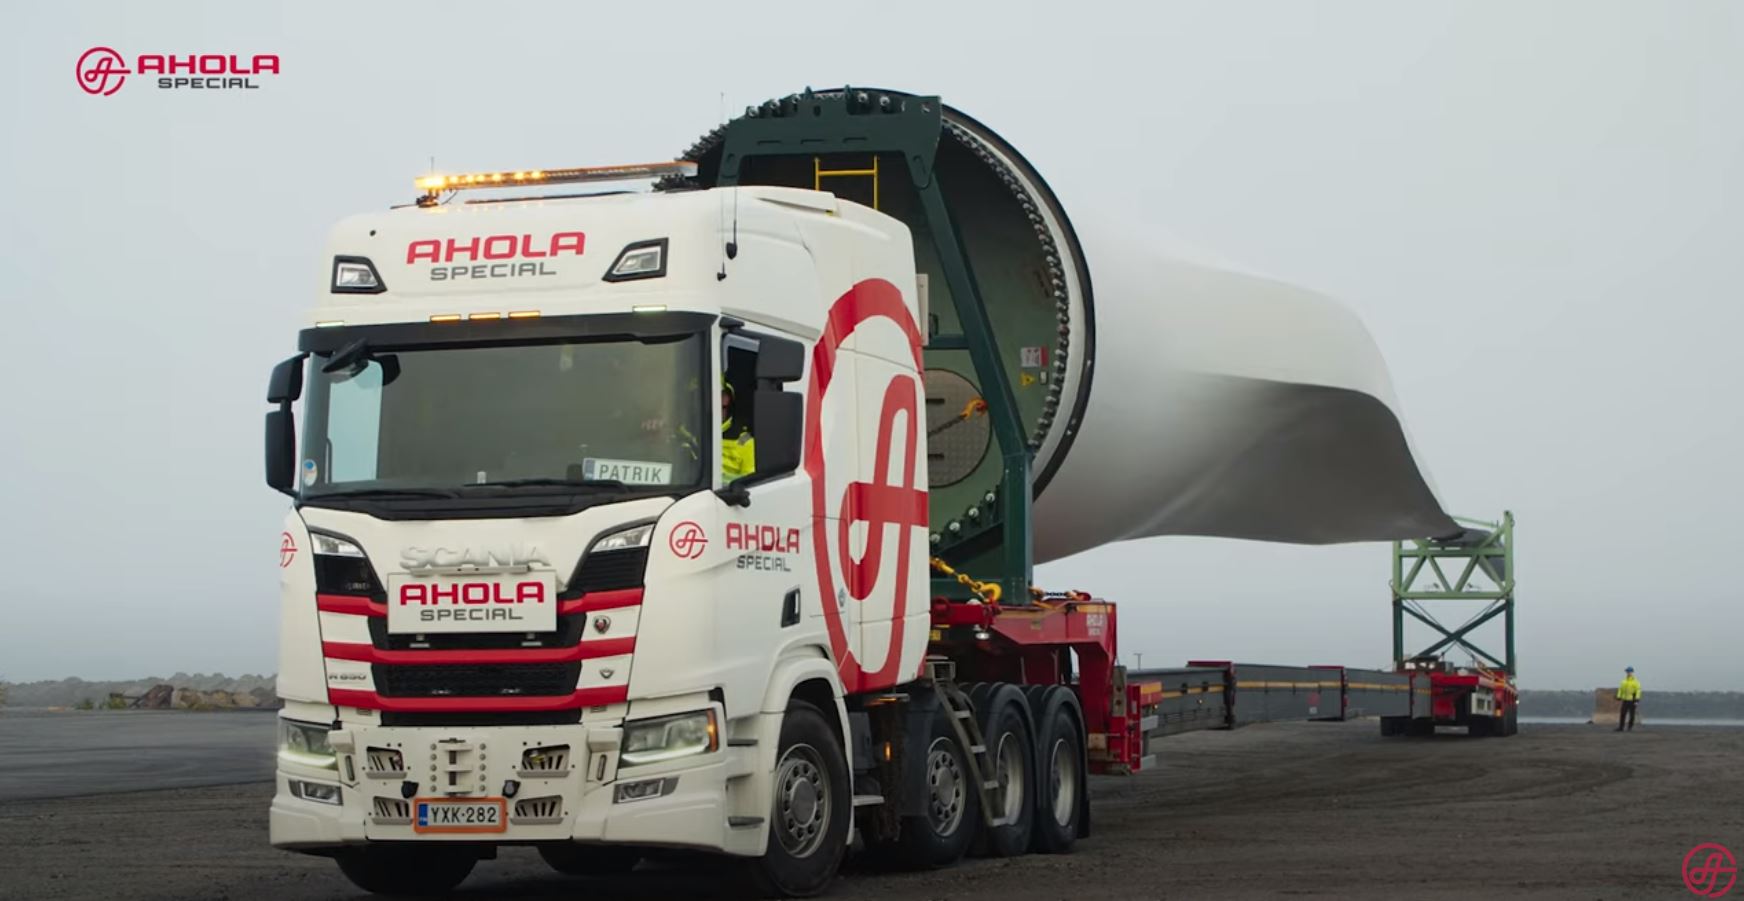 Ahola Special - The journey of a turbine blade